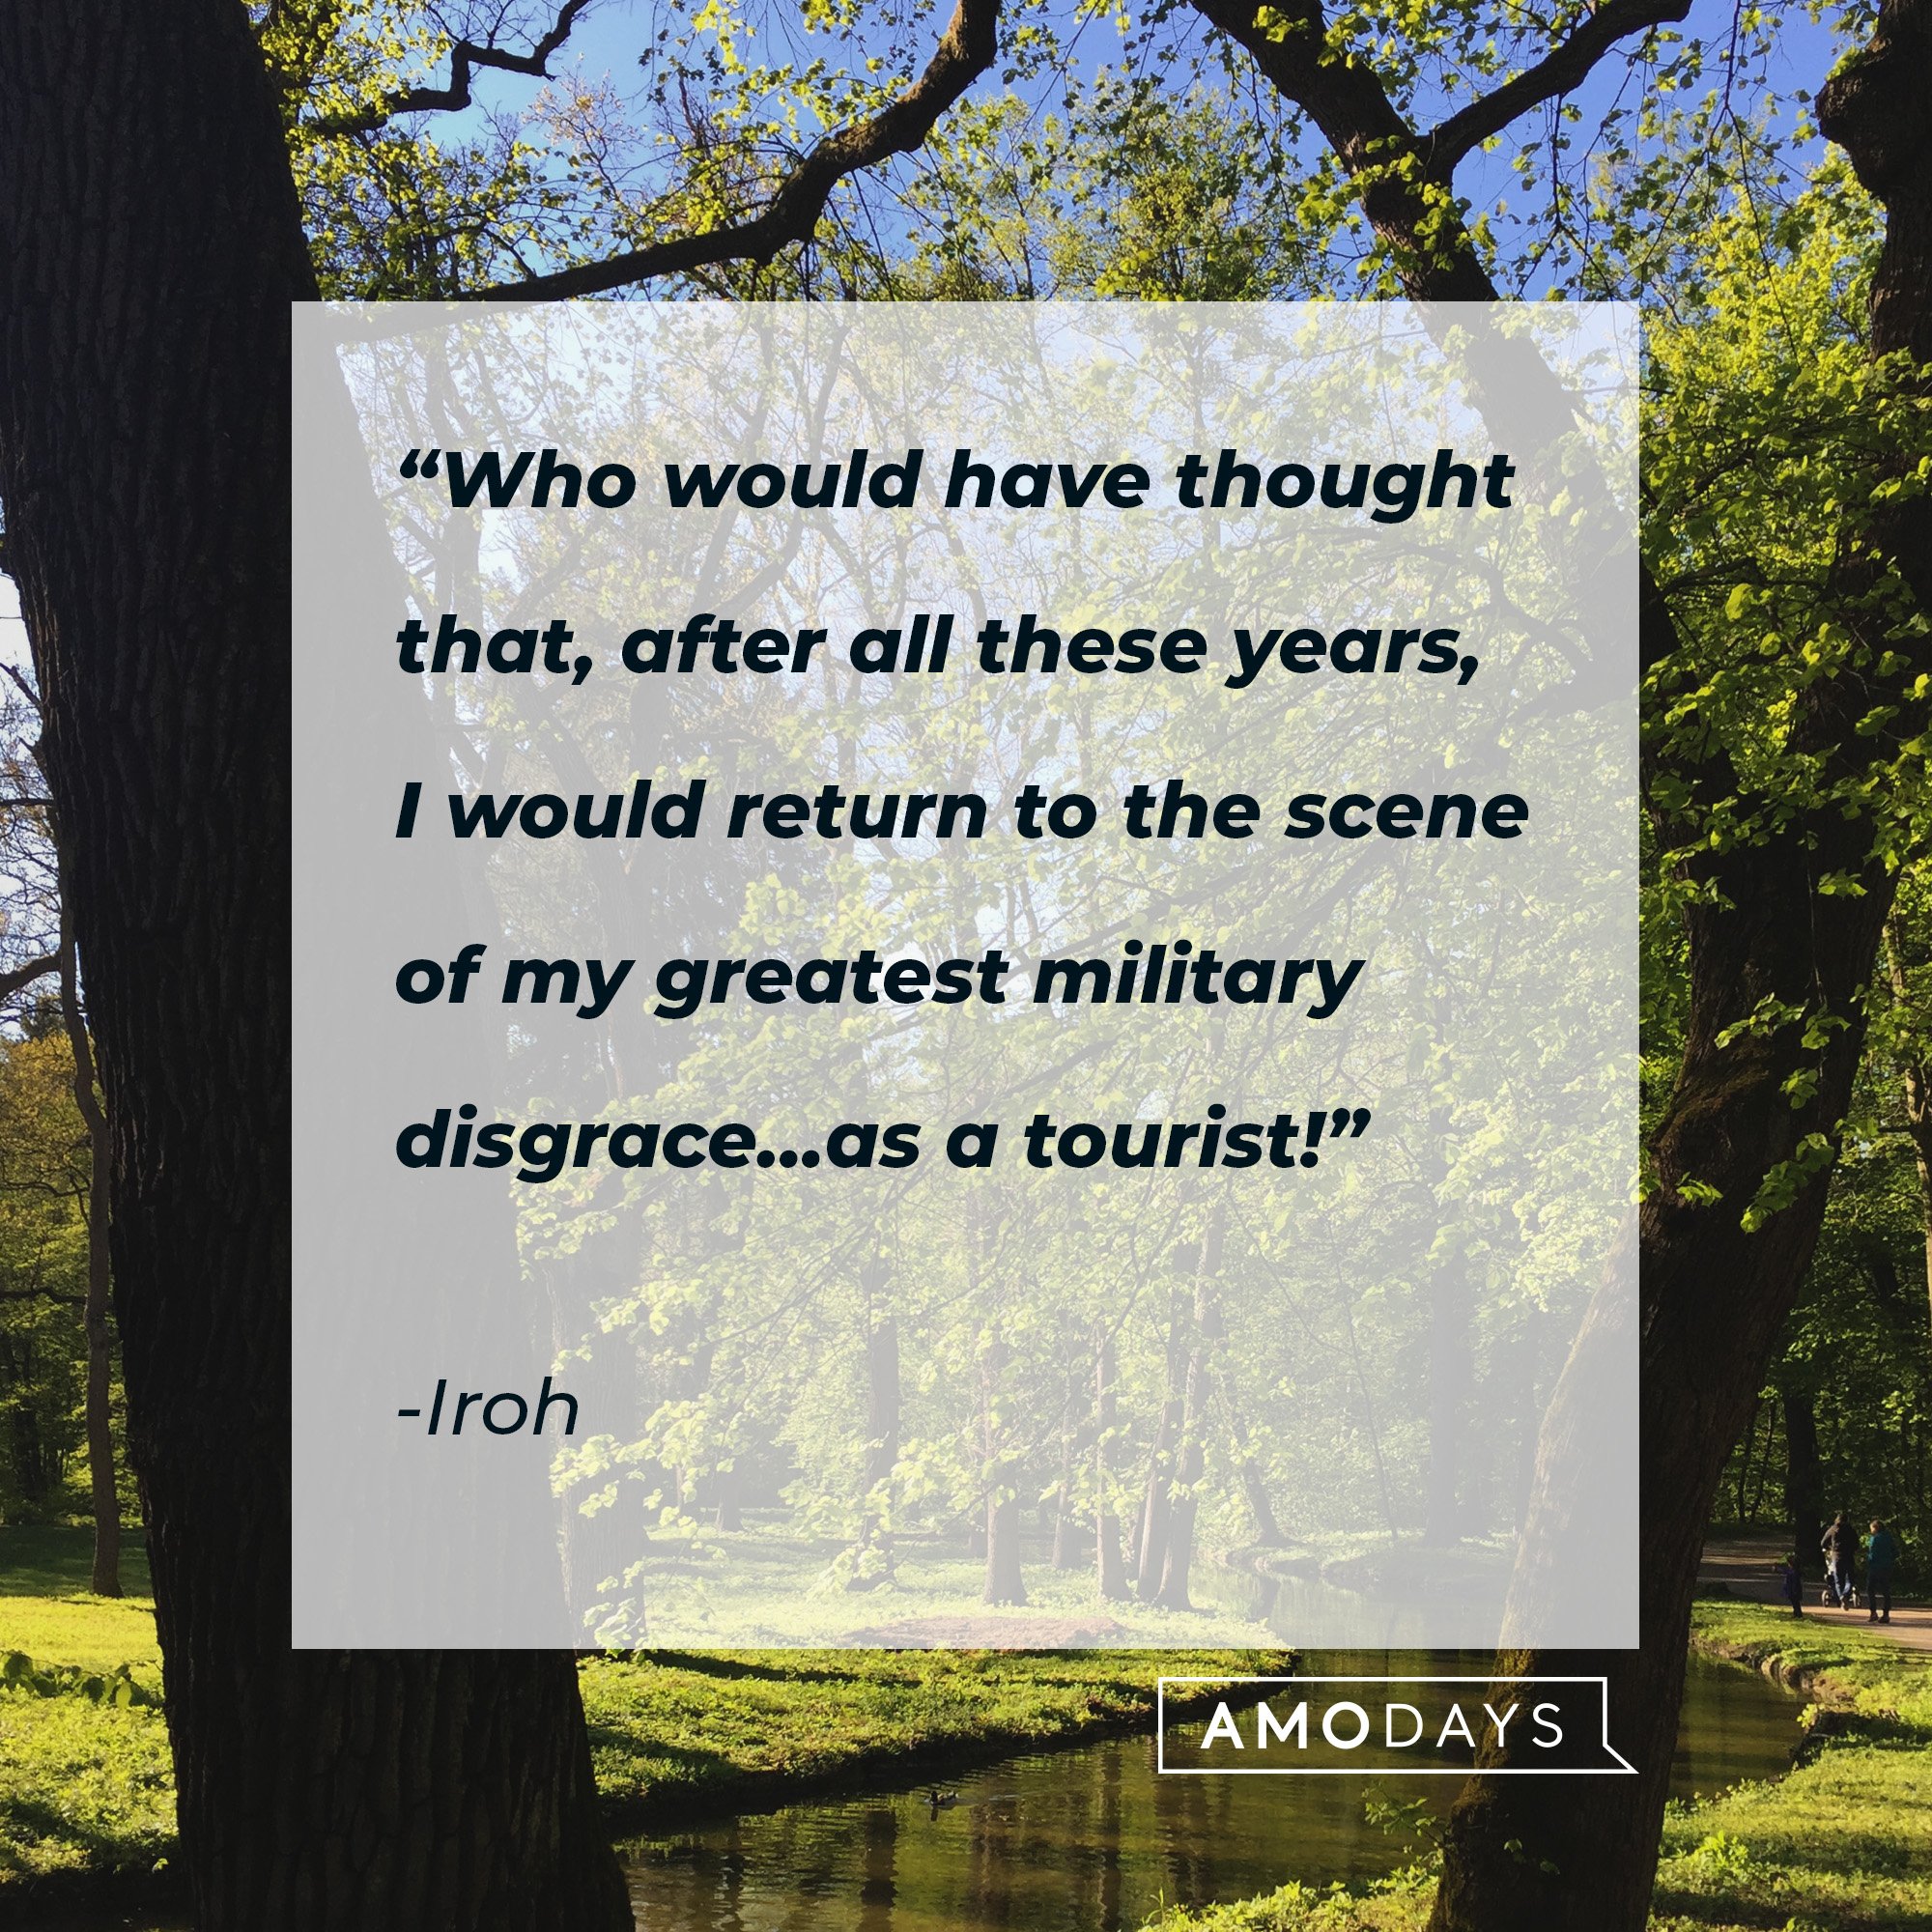  Iroh's quote: “Who would have thought that, after all these years, I would return to the scene of my greatest military disgrace…as a tourist!” | Image: AmoDays